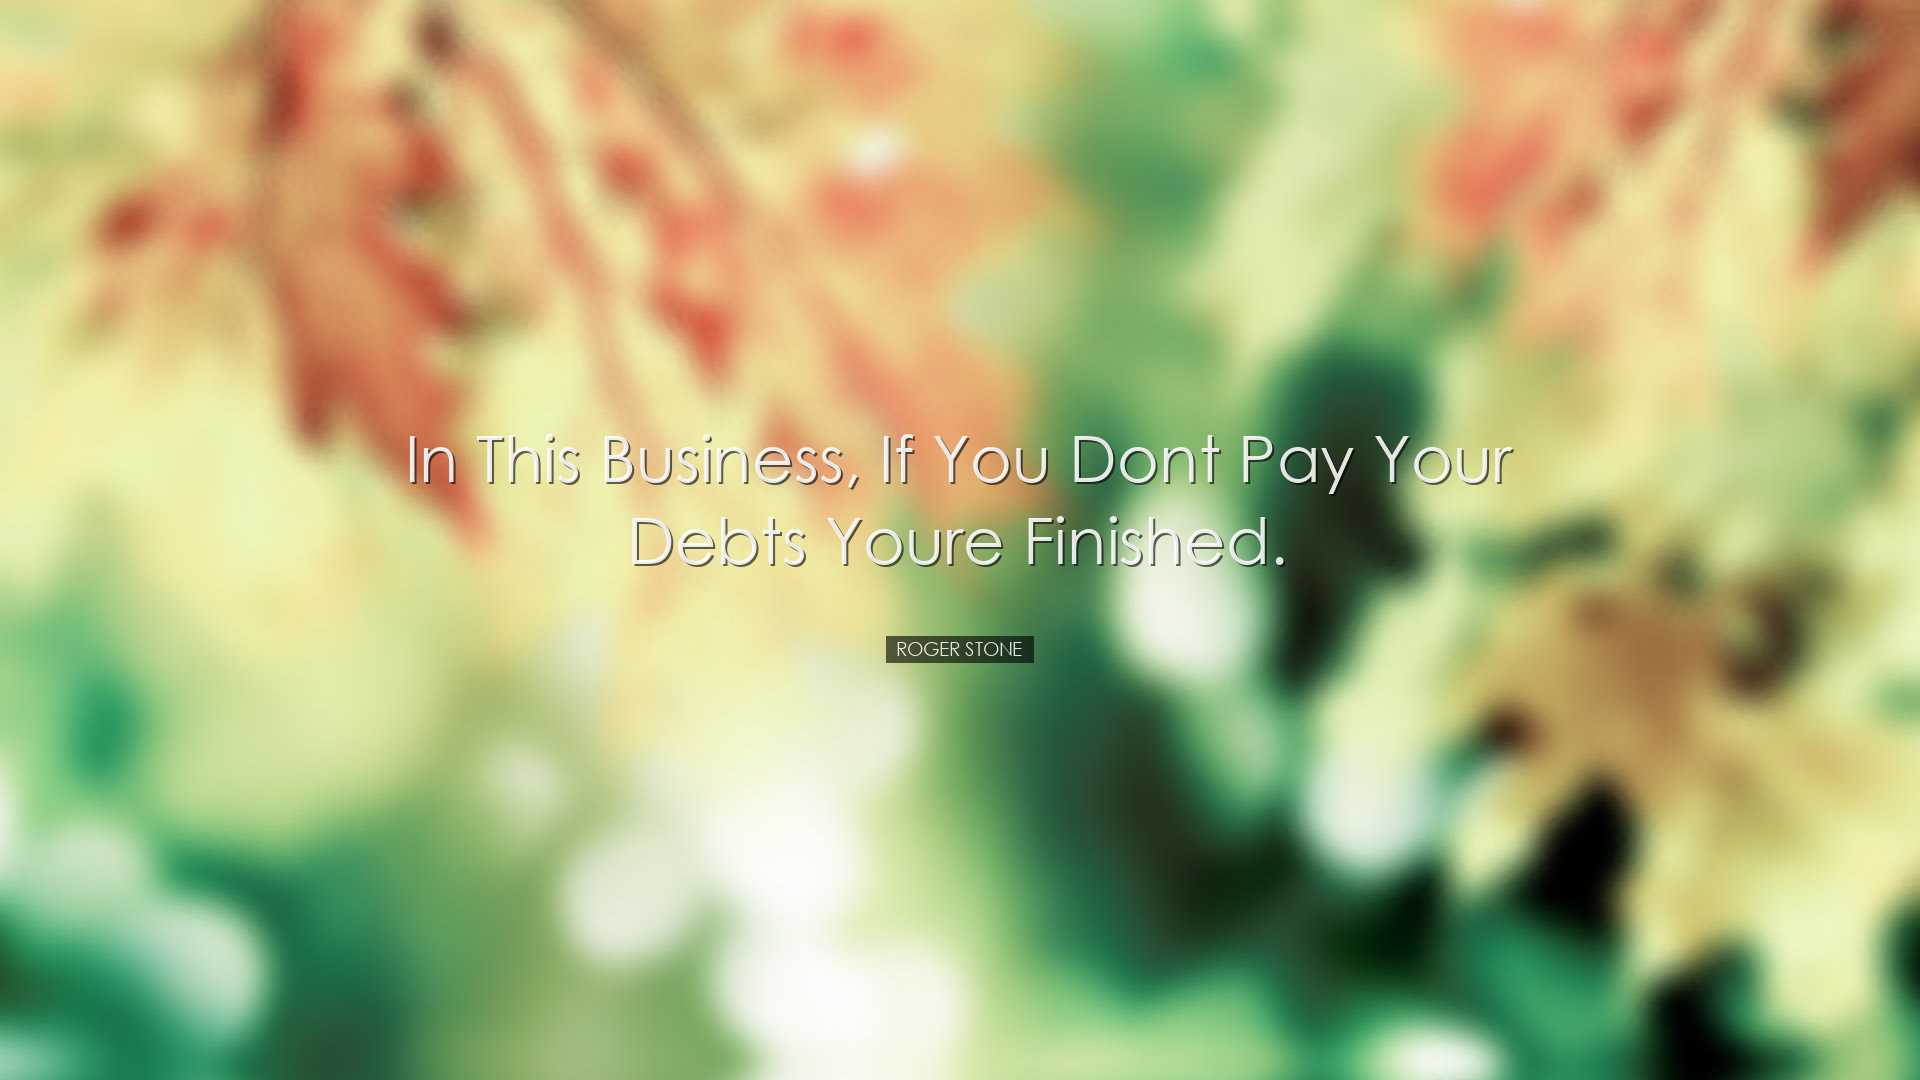 In this business, if you dont pay your debts youre finished. - Rog